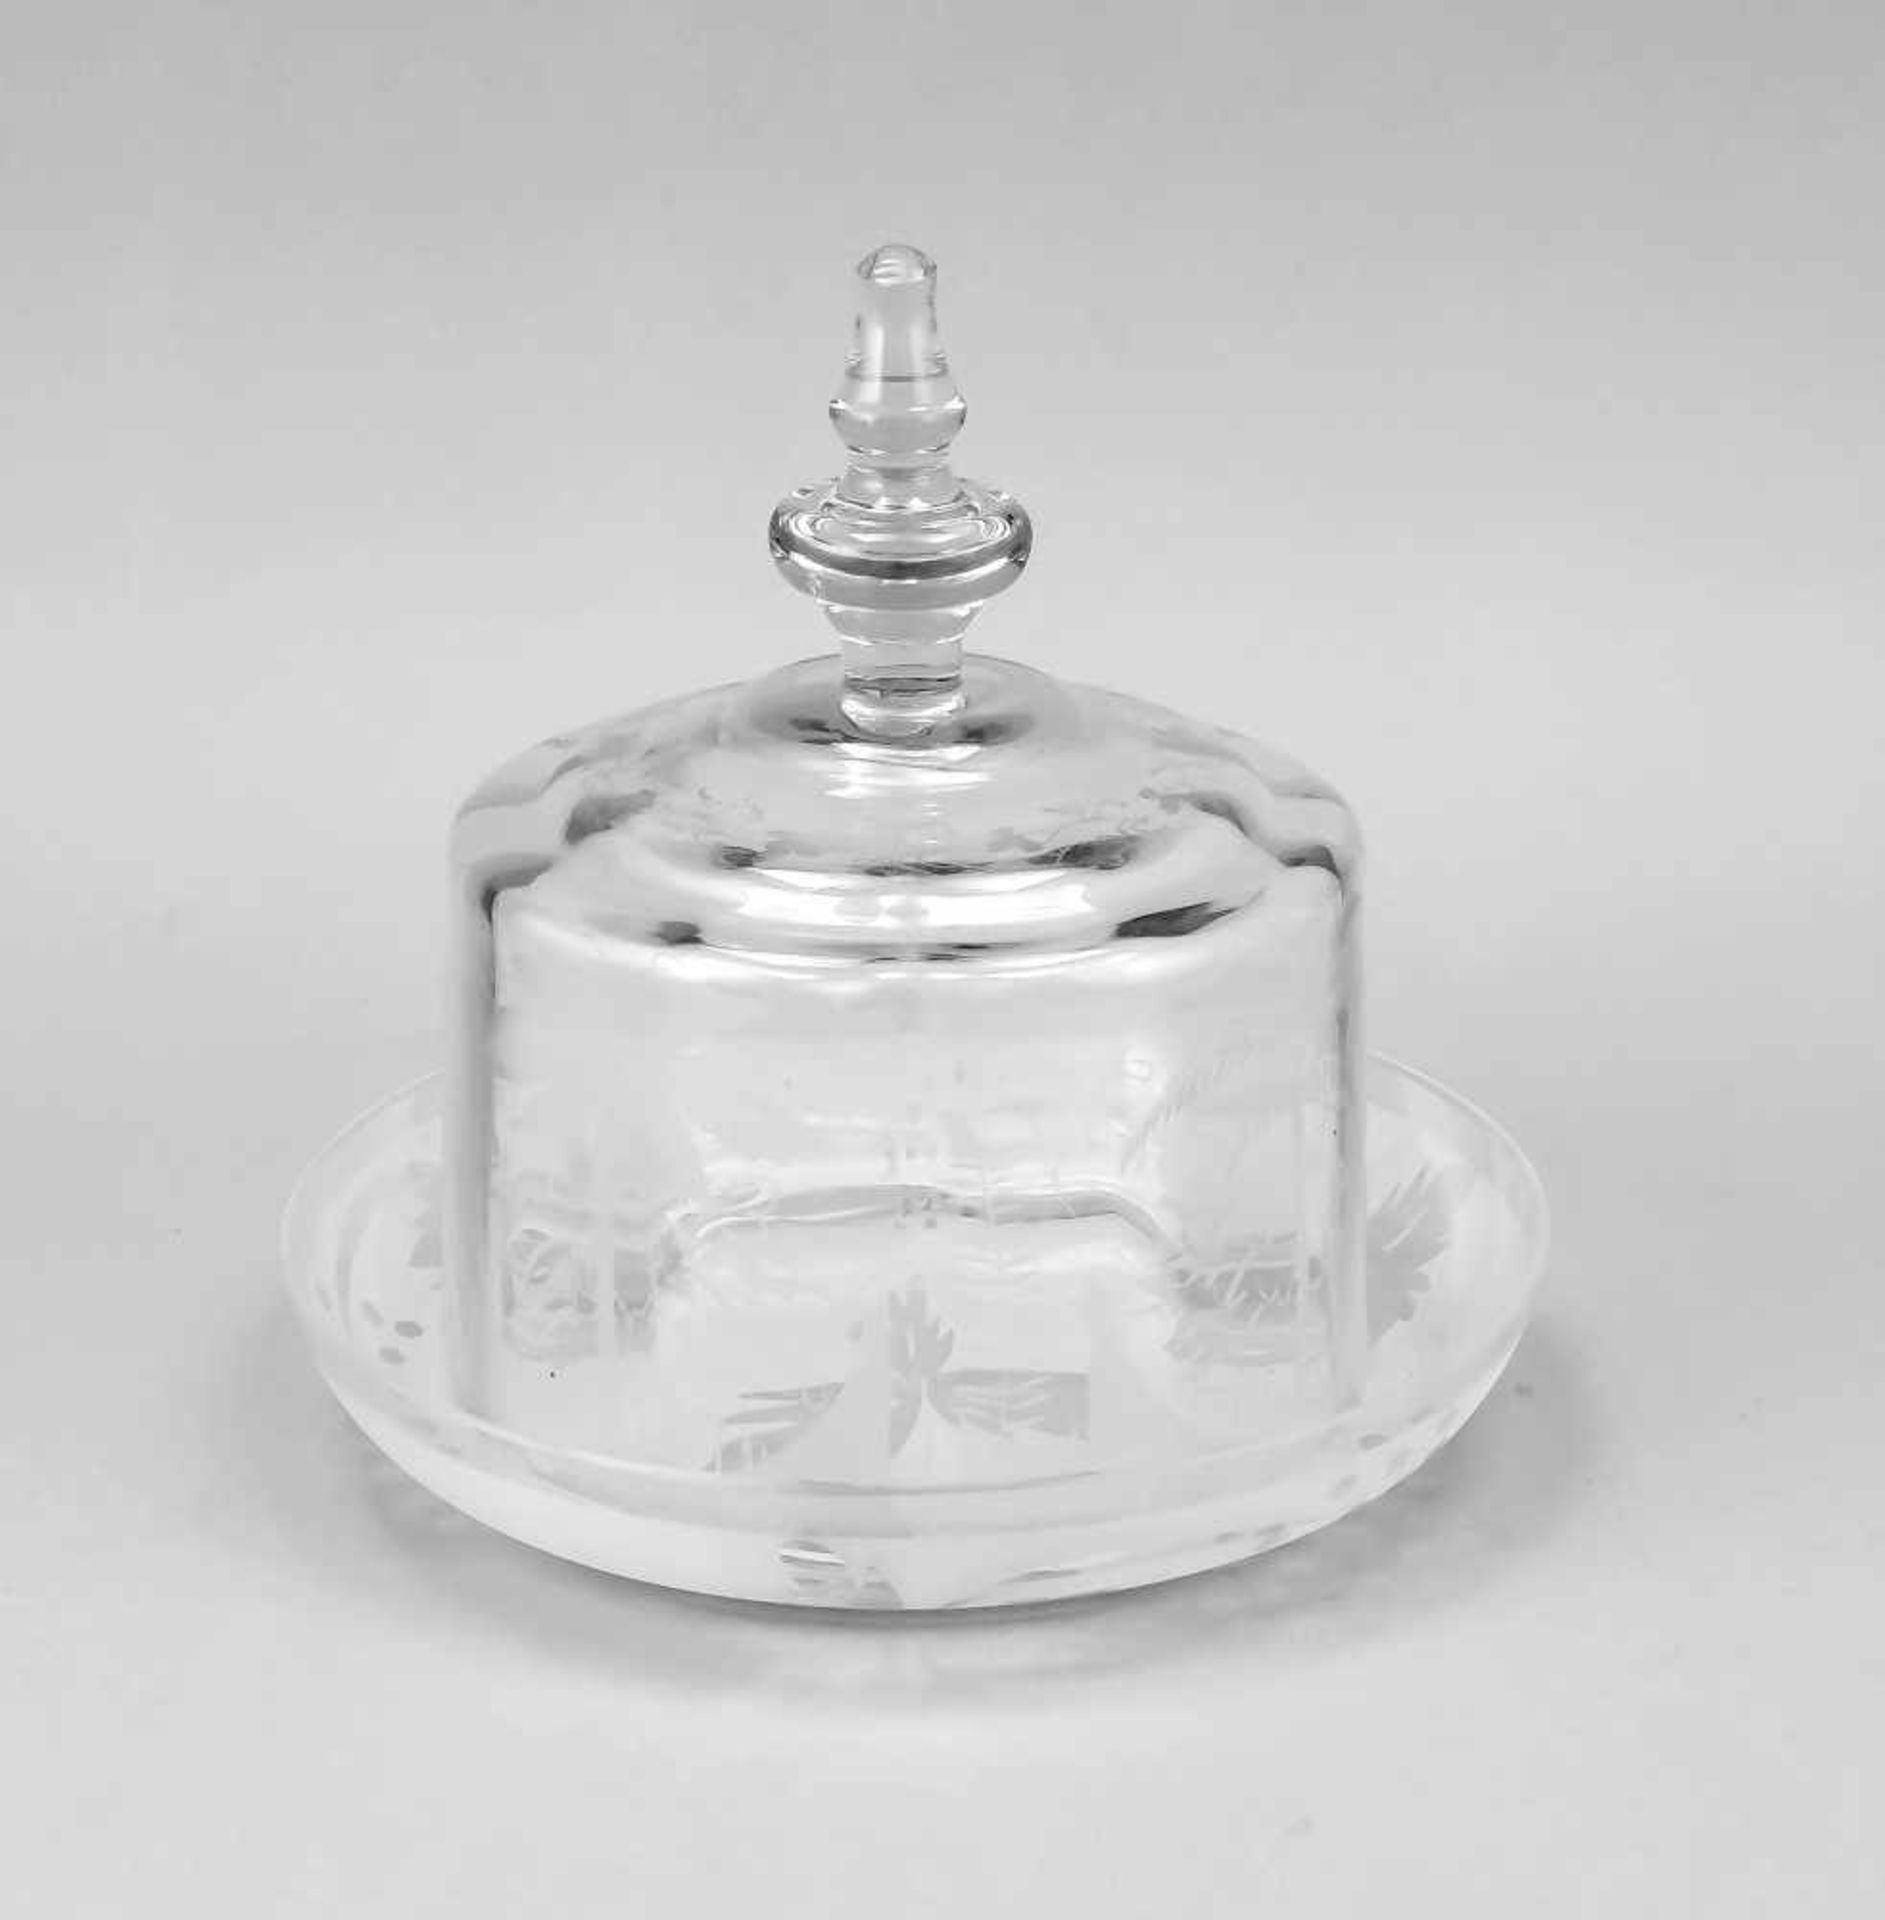 Glass cover with saucer, early 20th century, clear glass with cut and etched palm